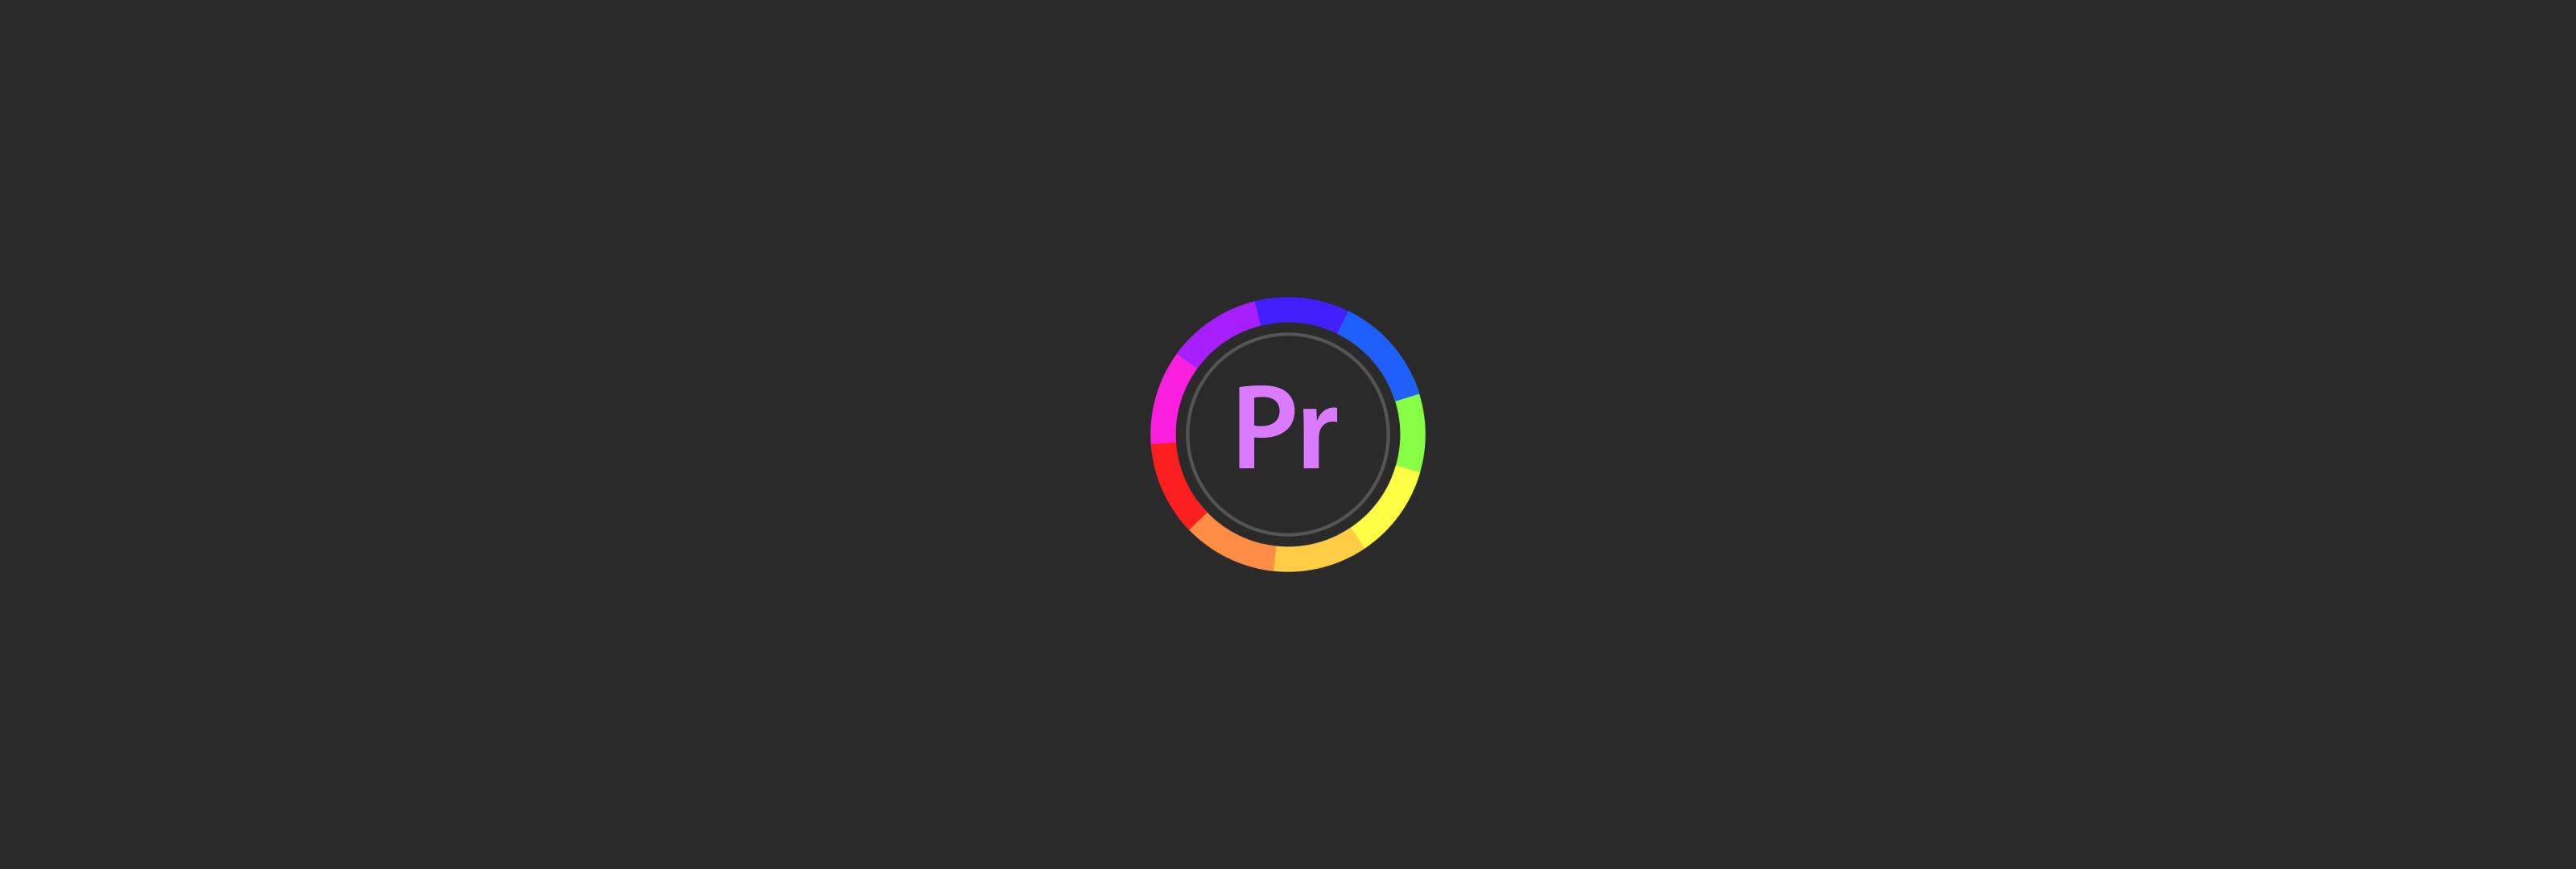 free lut editor for final cut pro